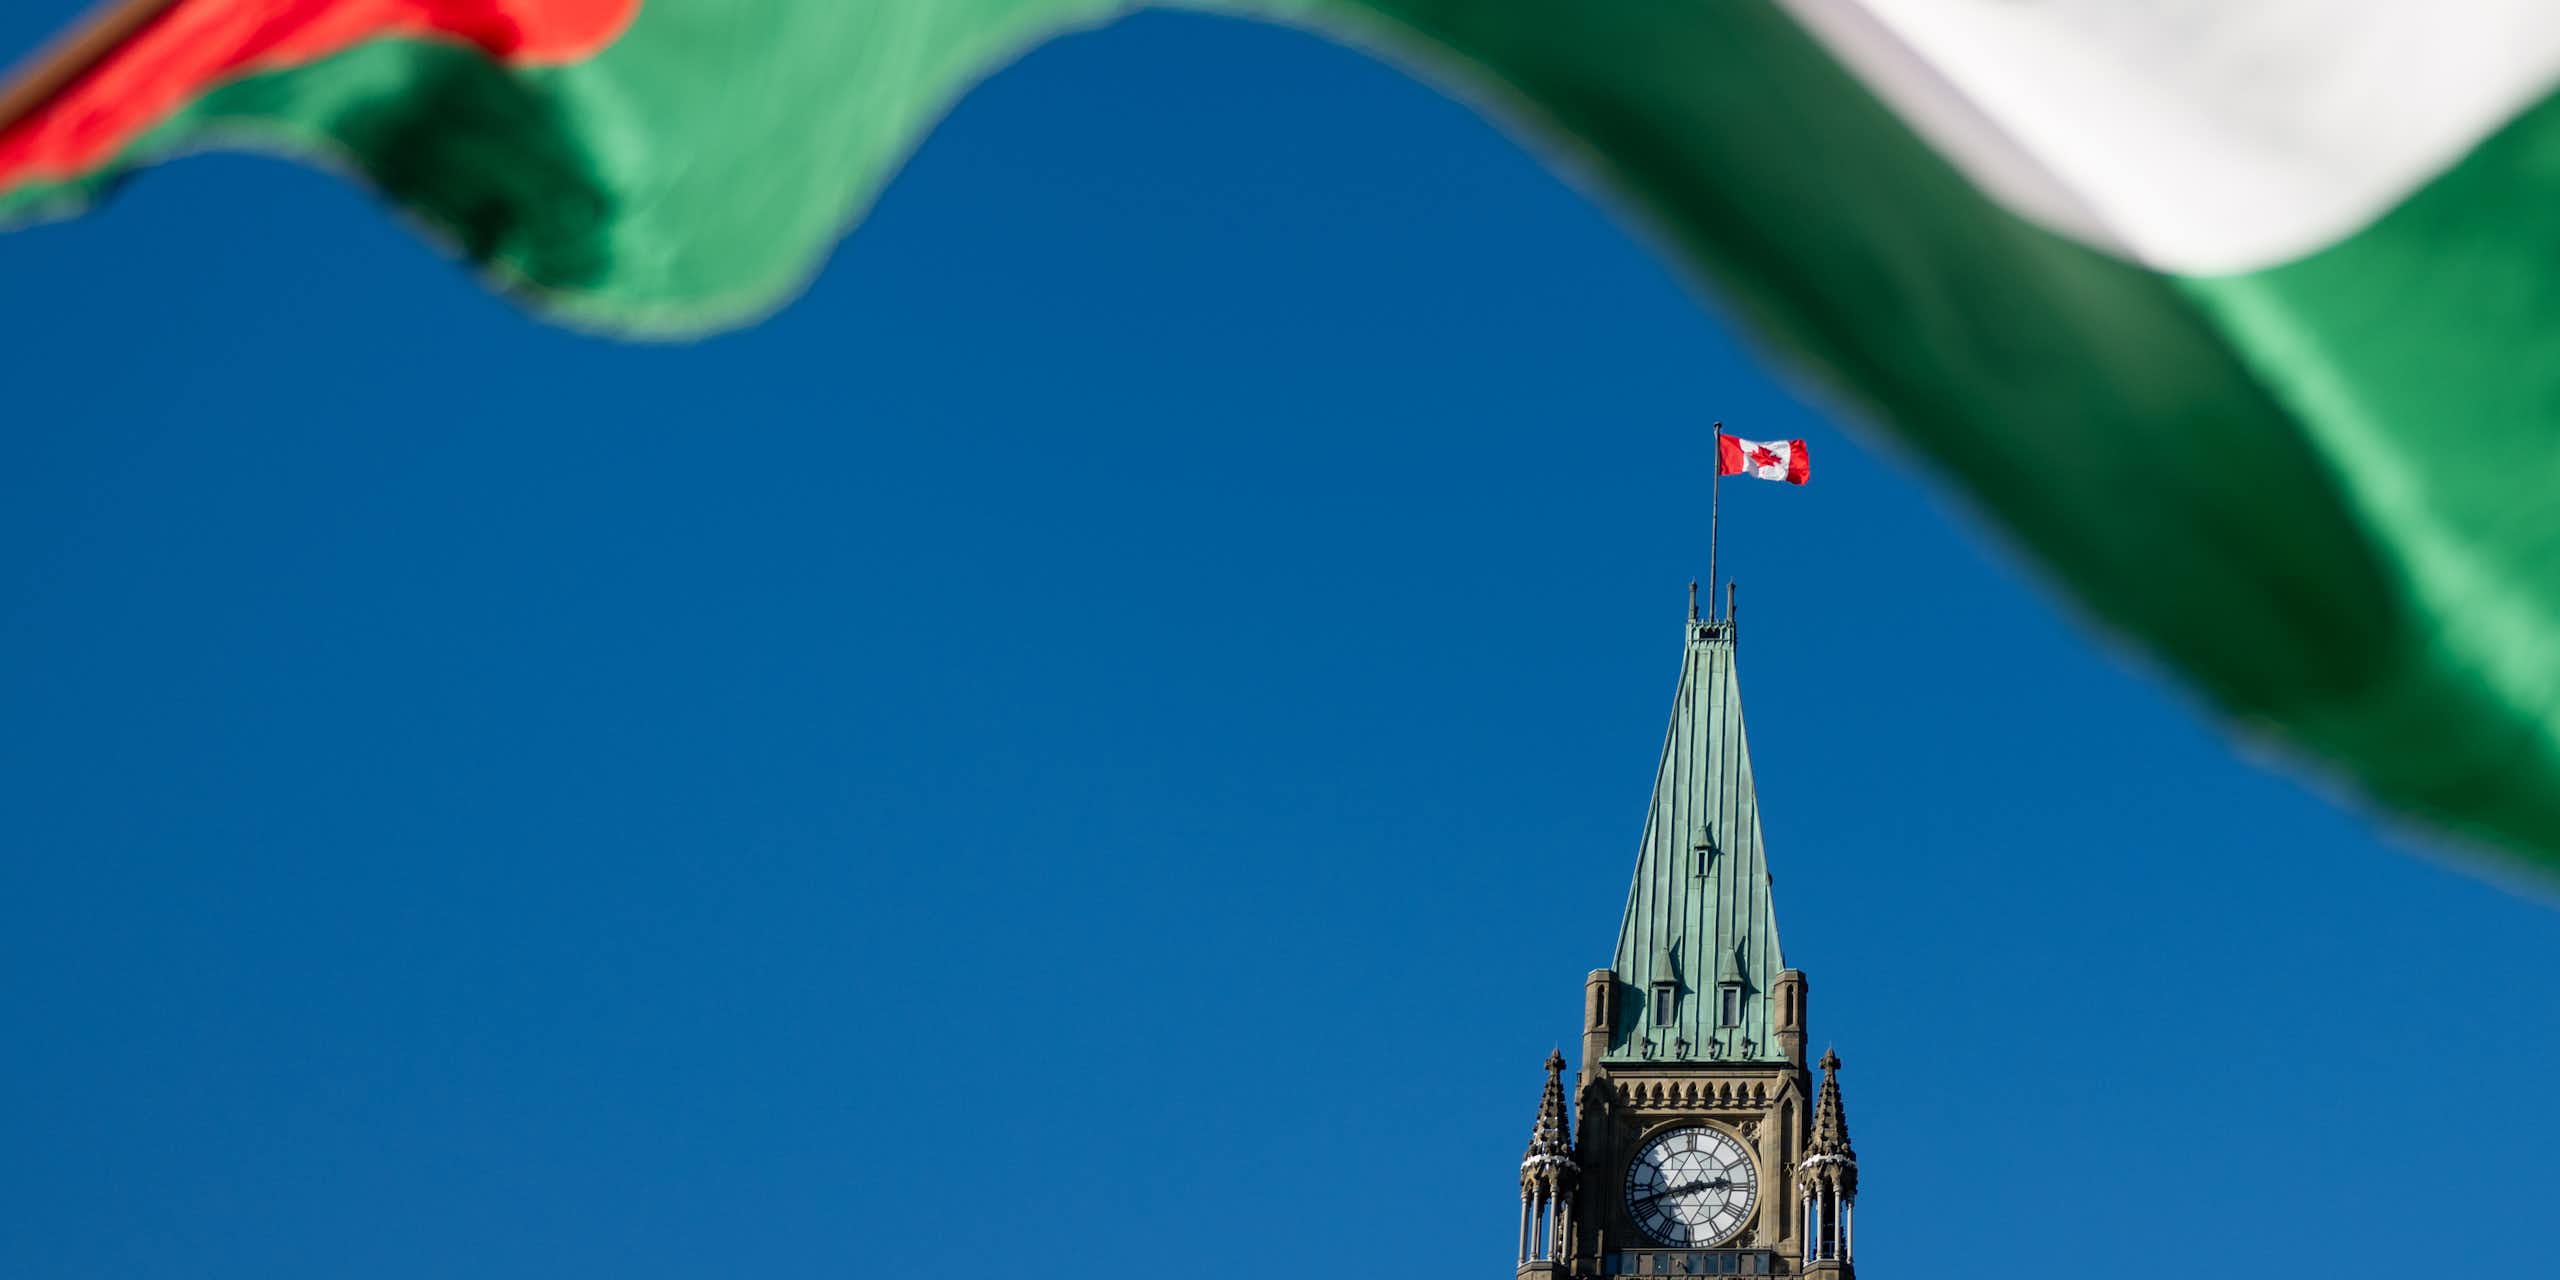 A green white and red flag frames the Peace Tower.